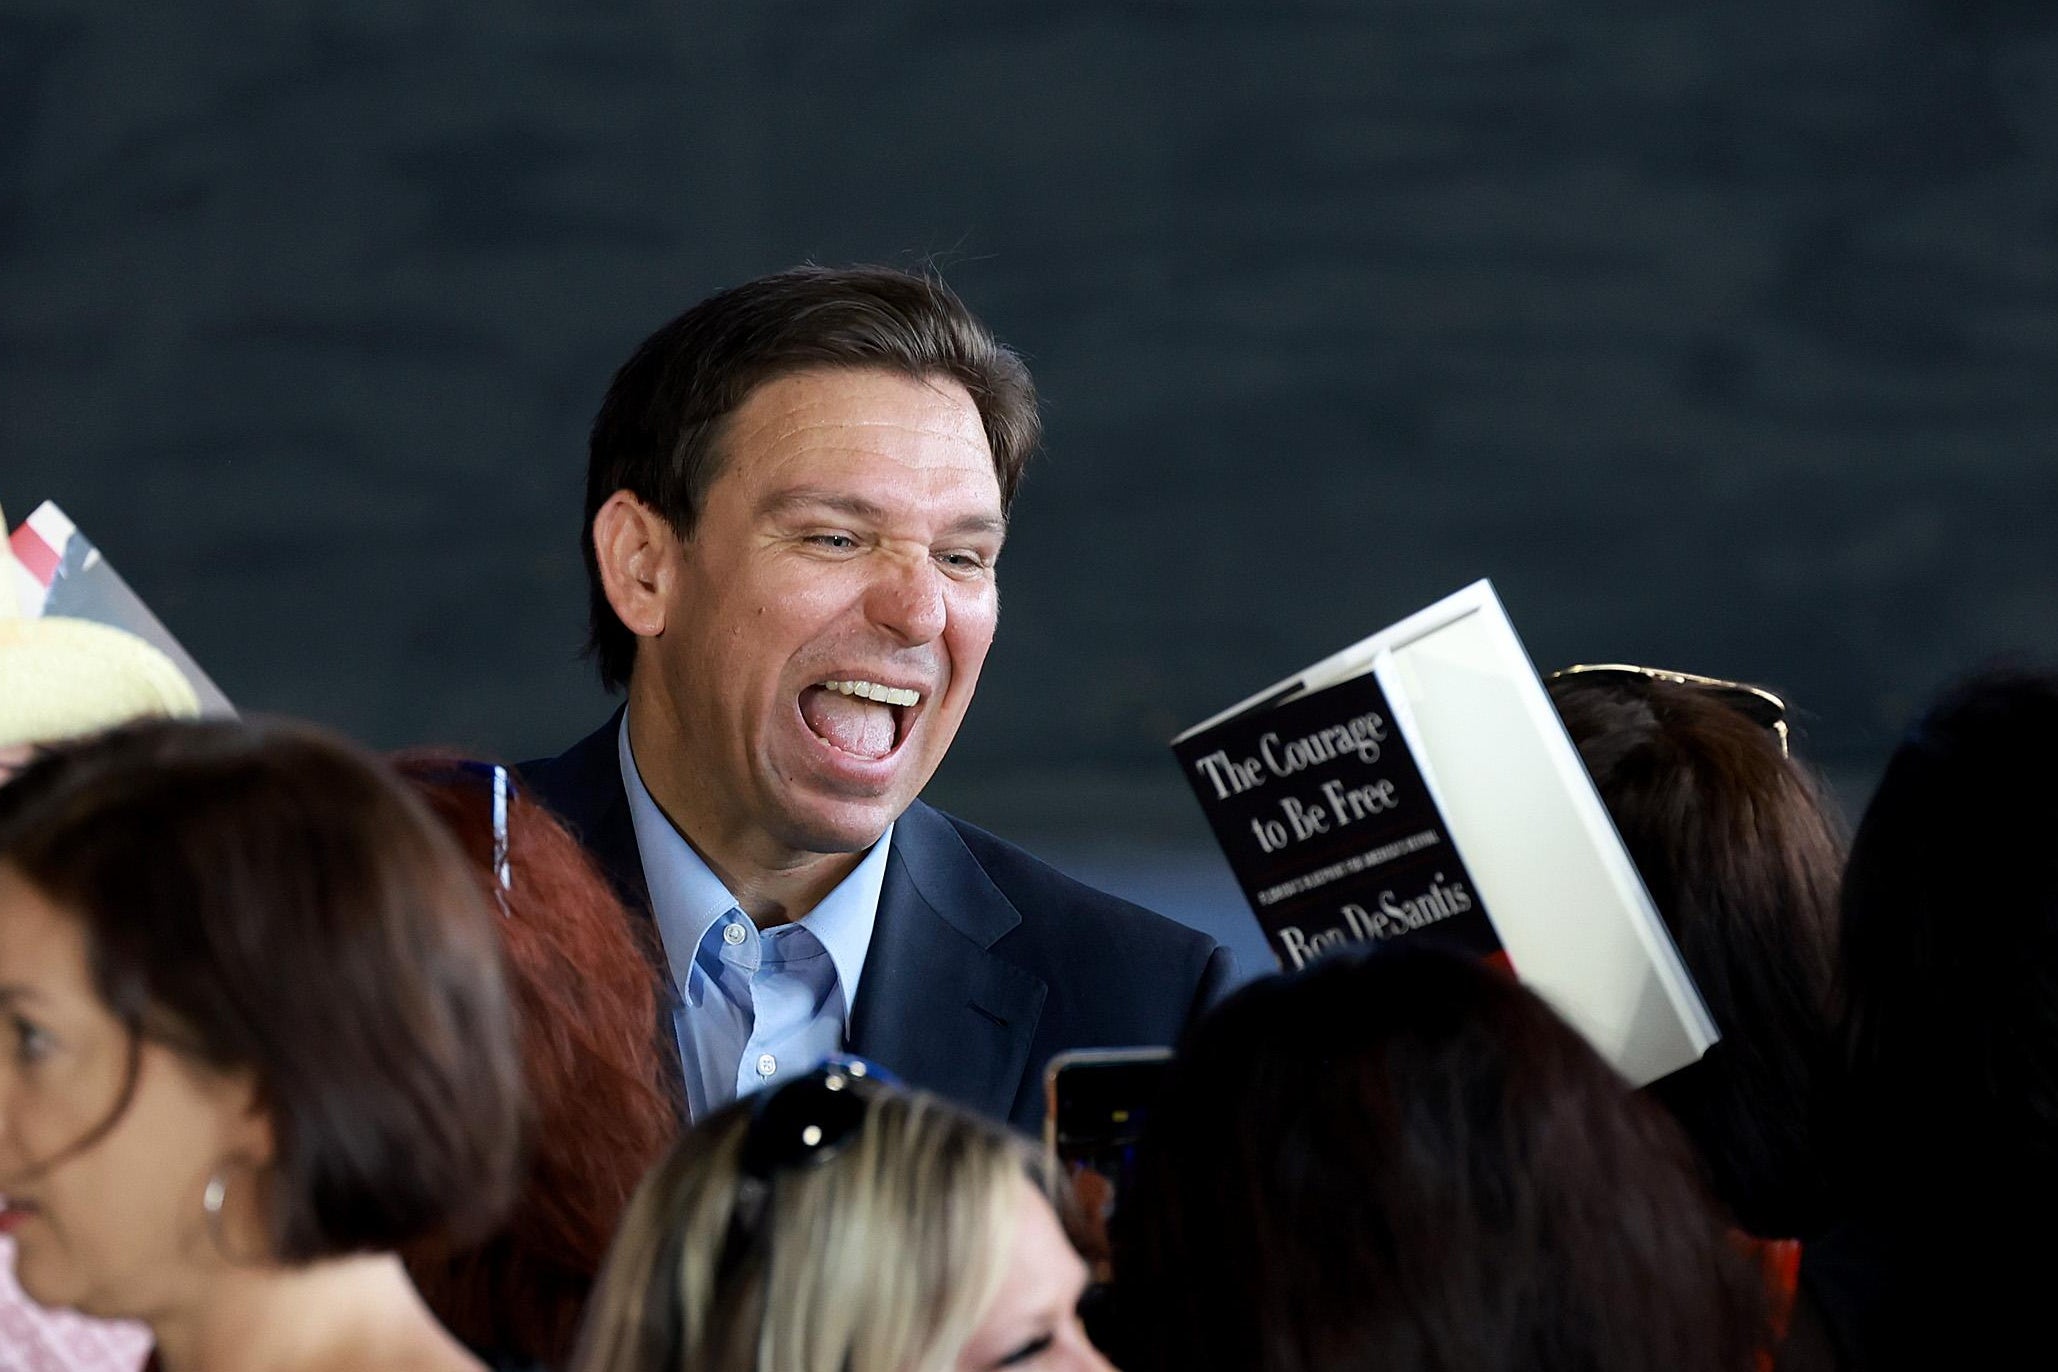 PINELLAS PARK, FLORIDA - MARCH 08:  Florida Gov. Ron DeSantis greets people during an event spotlighting his newly released book, “The Courage To Be Free: Florida’s Blueprint For America’s Revival” at the Orange County Choppers Road House & Museum on March 08, 2023 in Pinellas Park, Florida.  Gov. DeSantis is reportedly preparing to run in the 2024 presidential election.  (Photo by Joe Raedle/Getty Images)